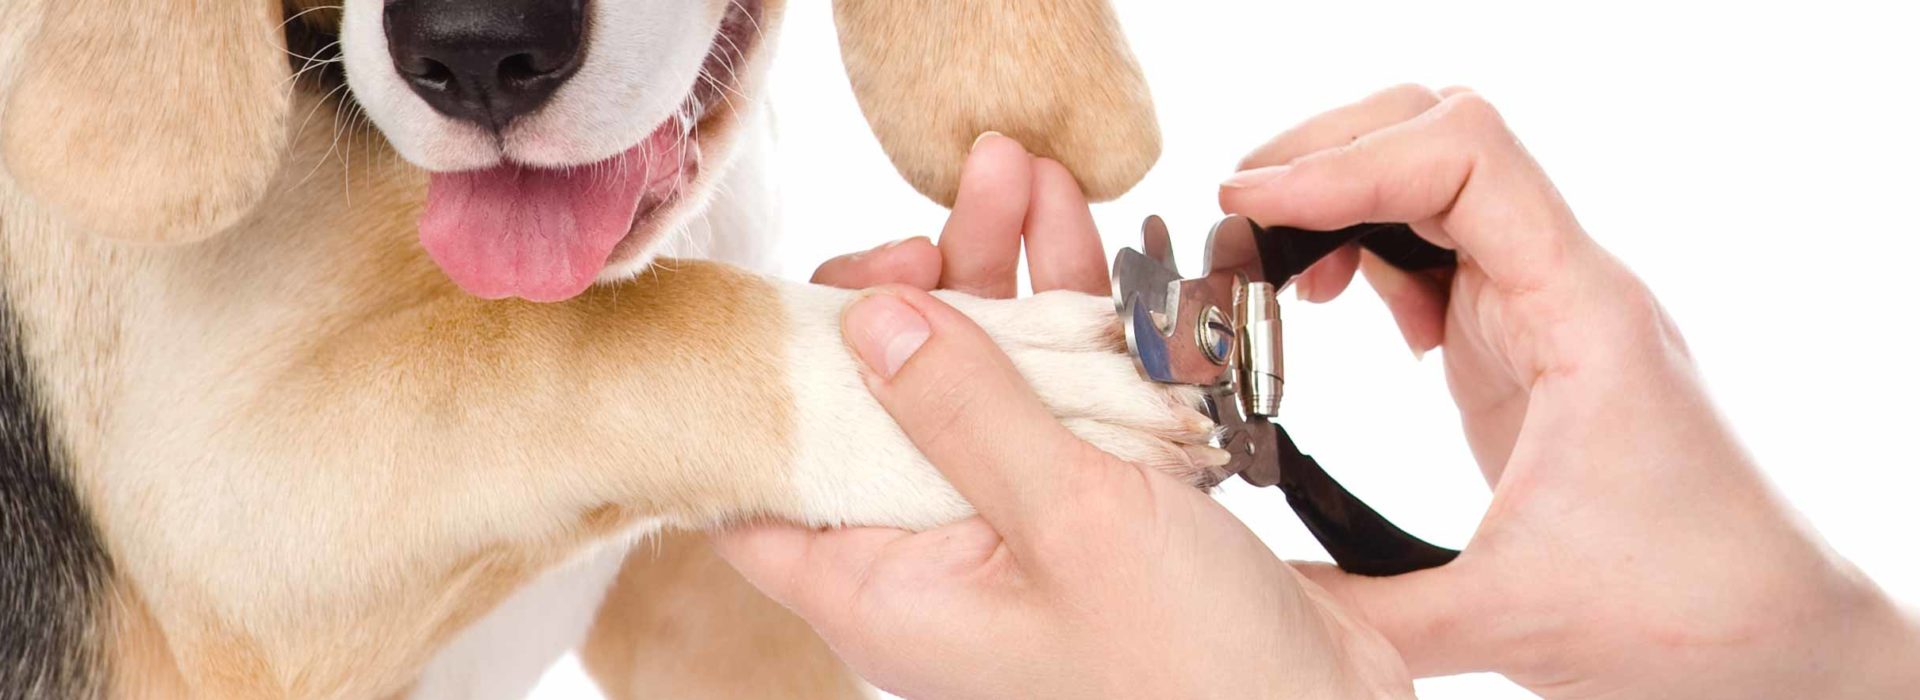 Ear Cleaning and Nail Trimming for Dogs - Mill Creek Animal Hospital